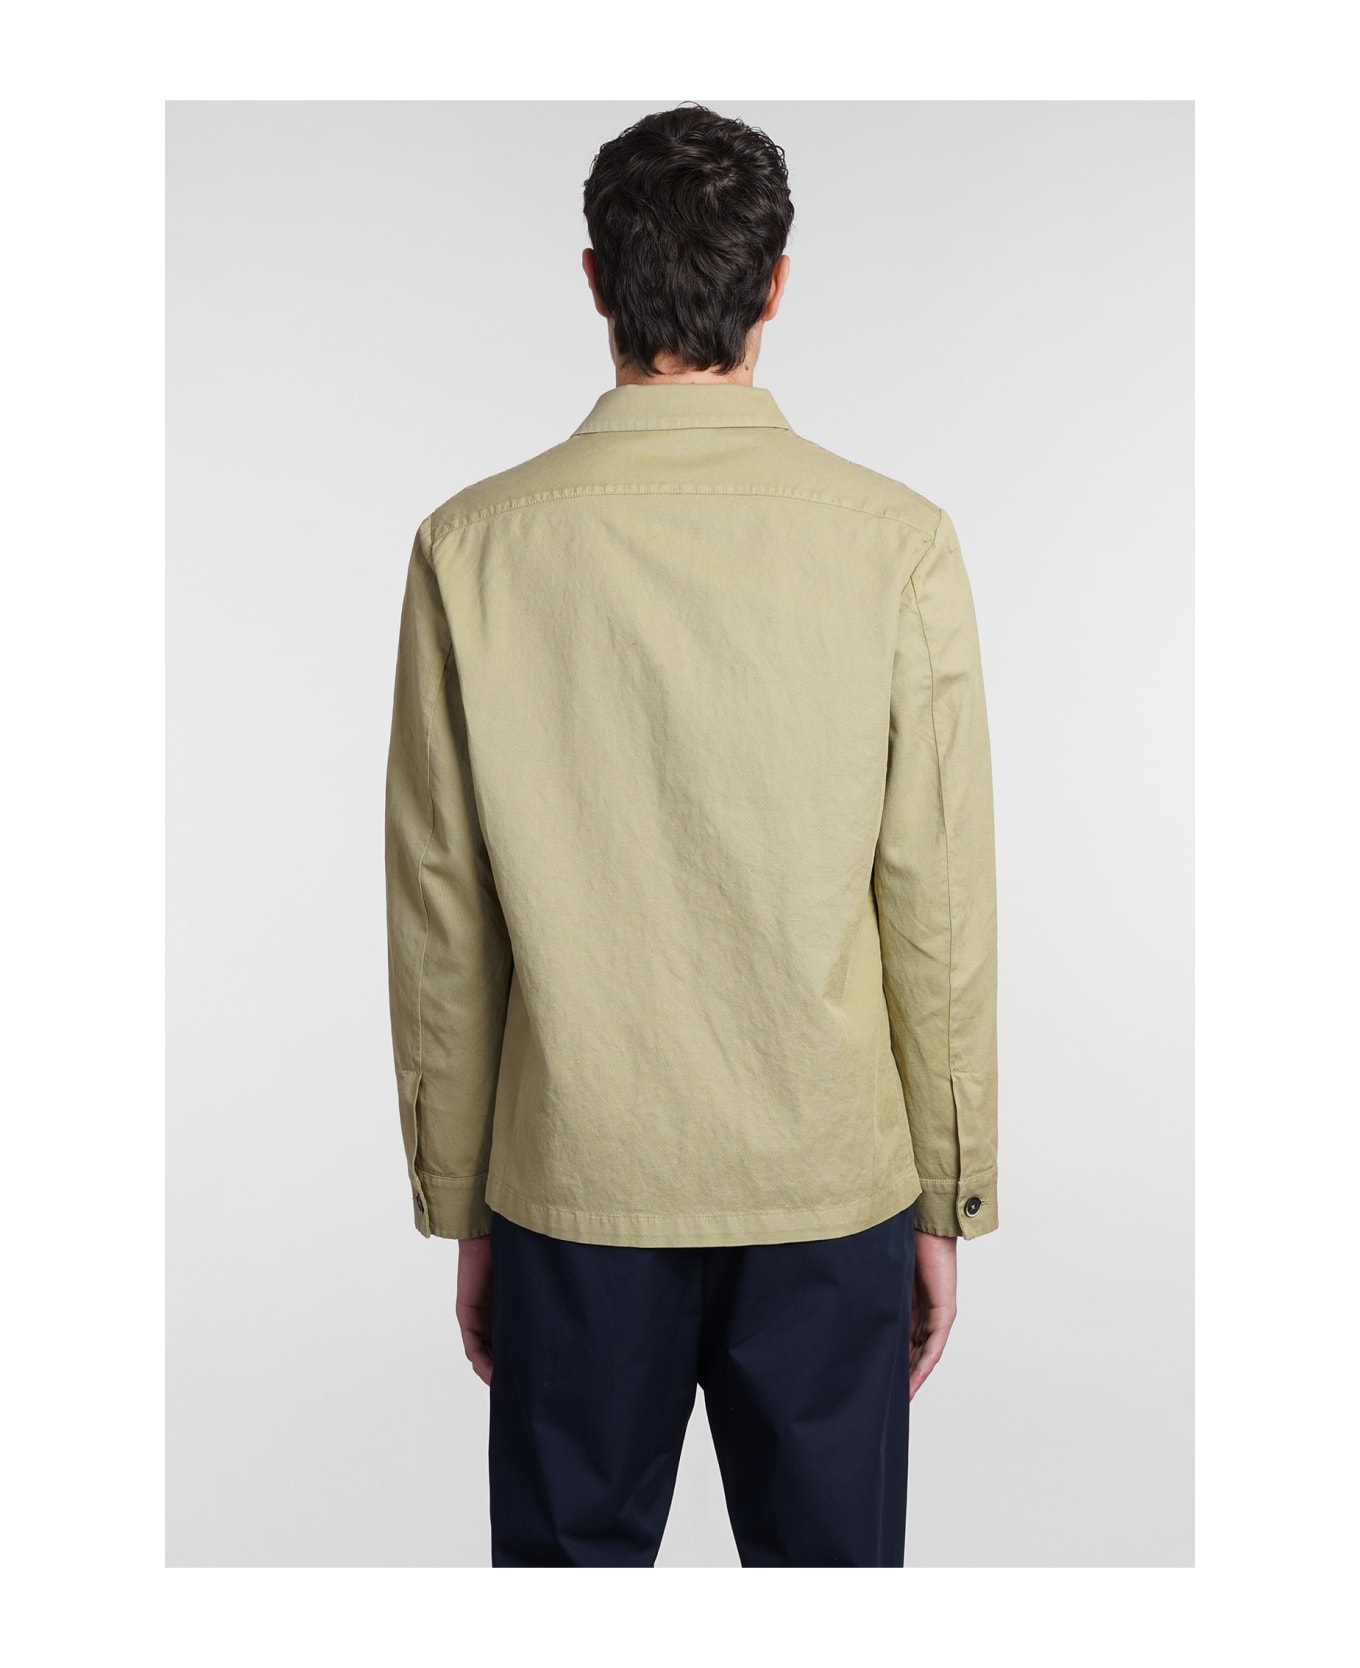 Barena Cedrone Jacket In Green Cotton - green